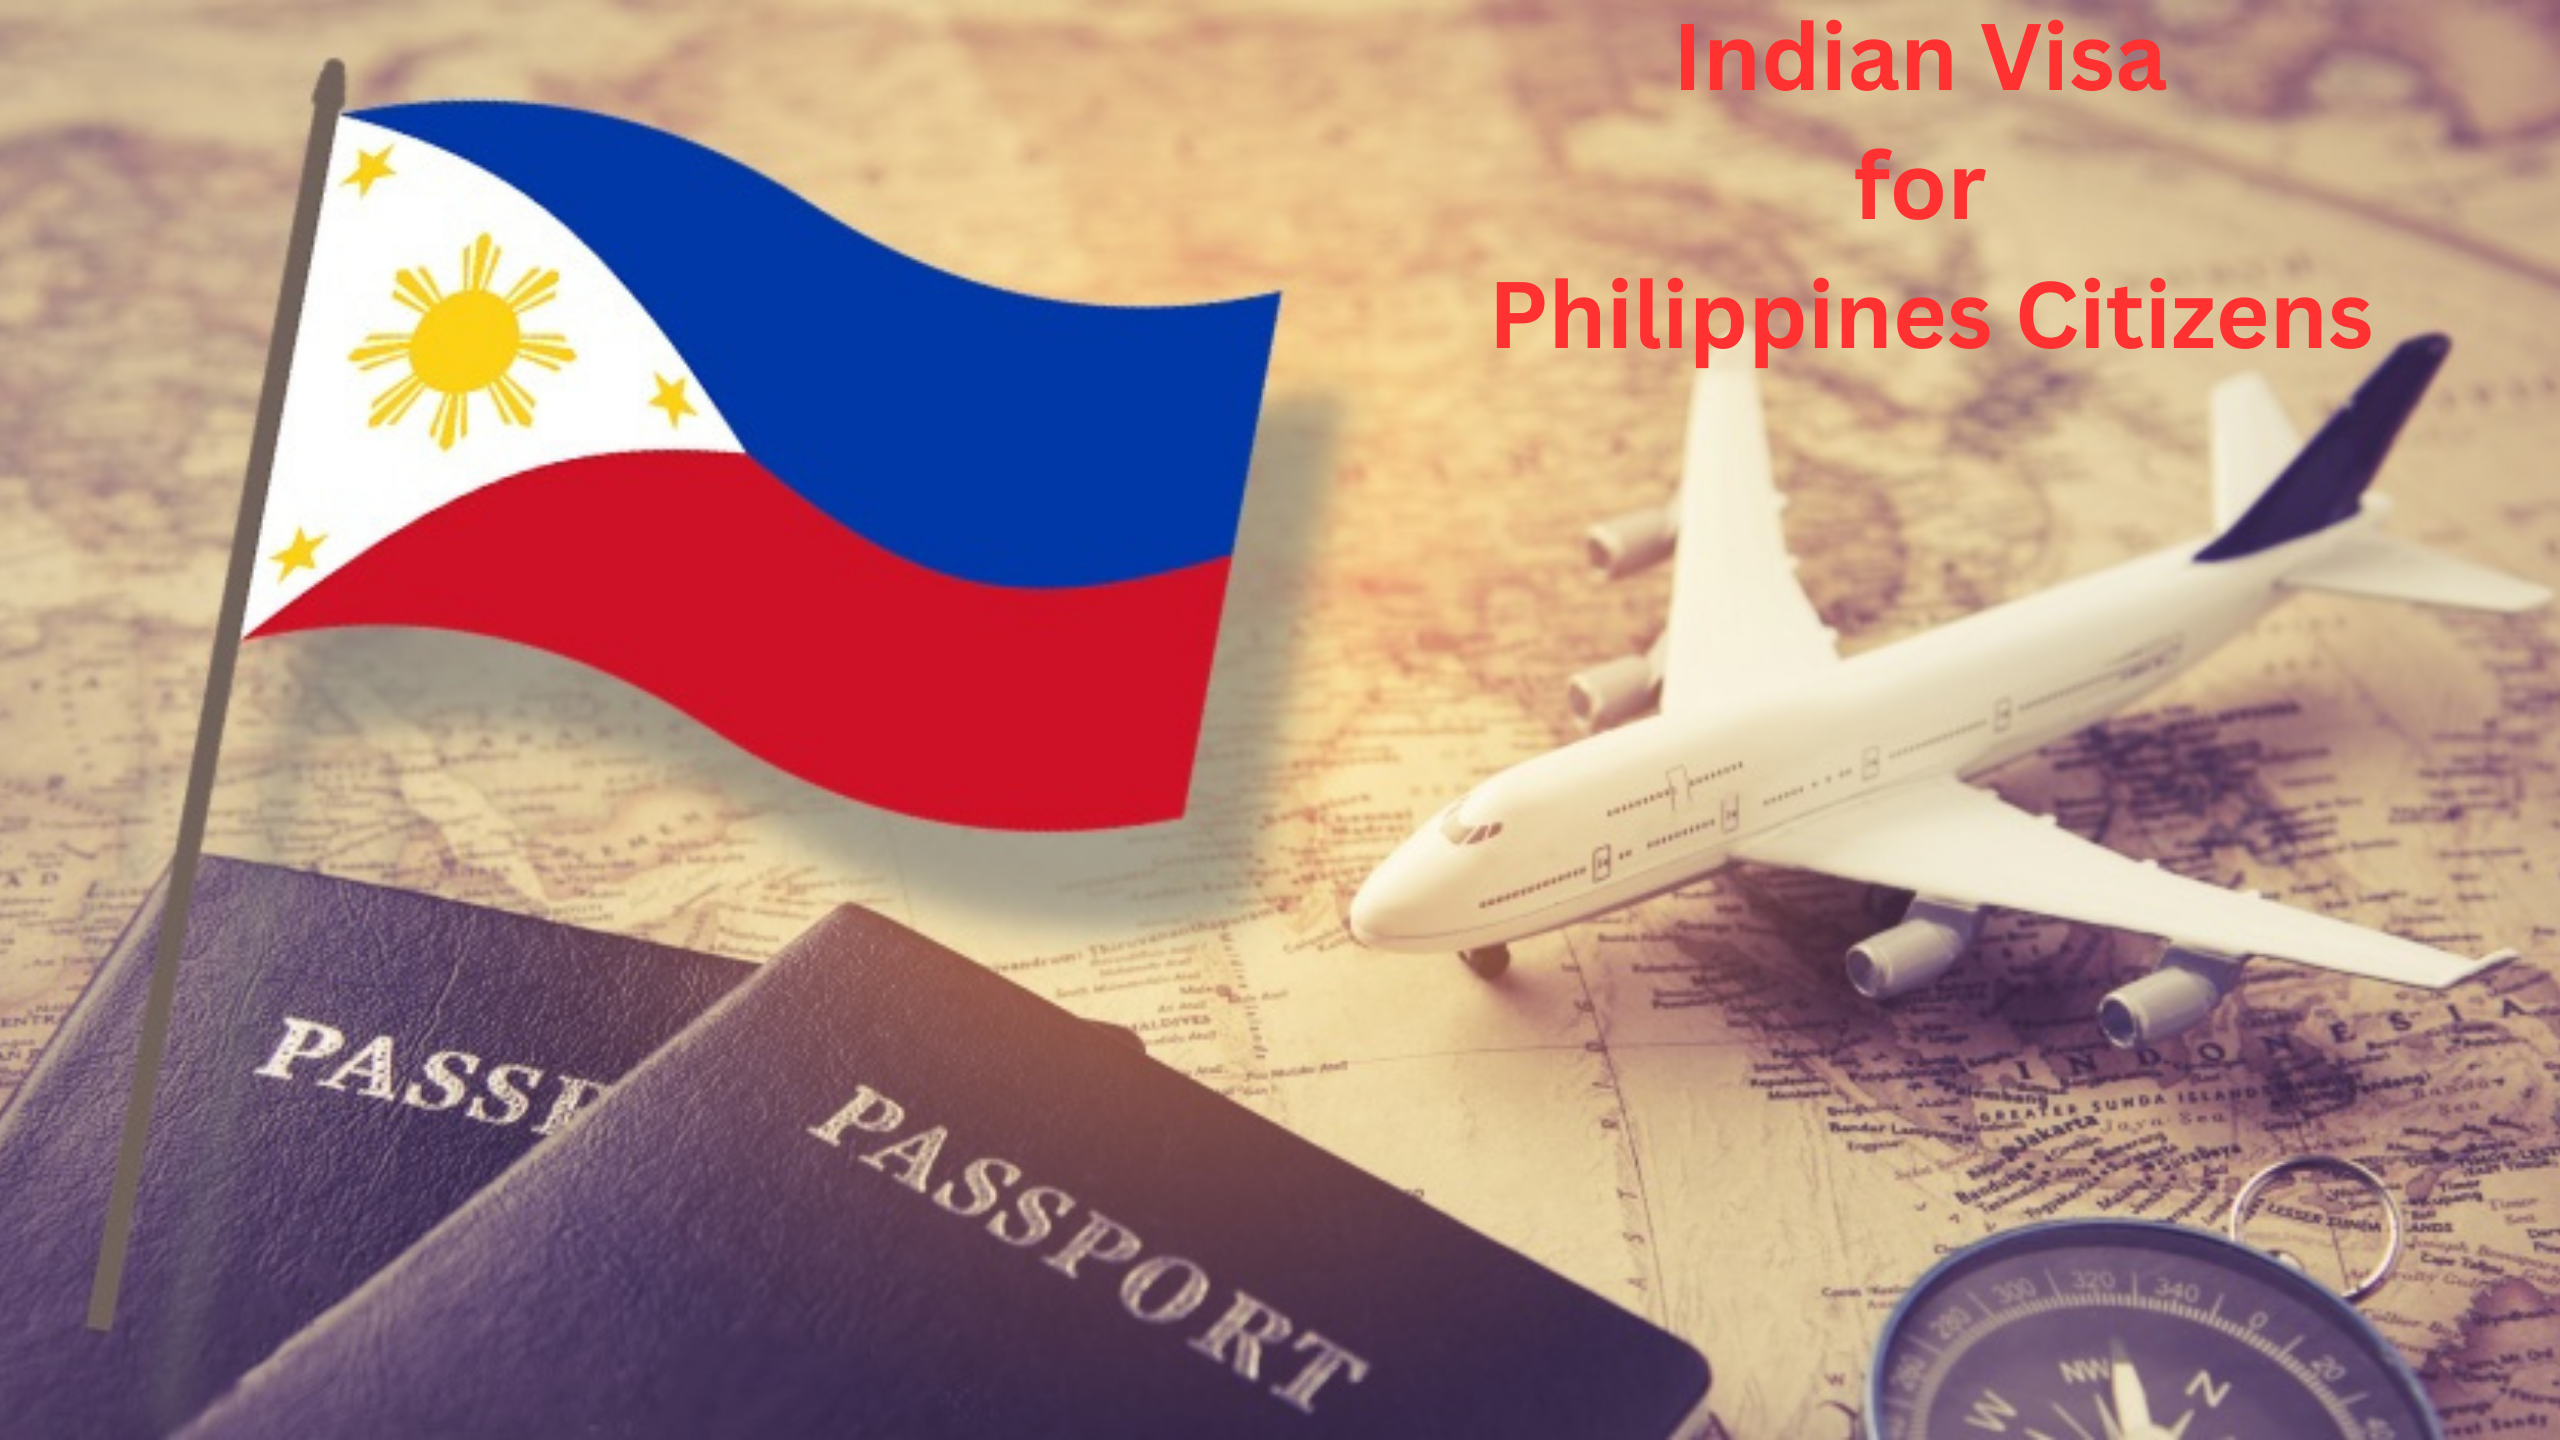 Indian Visa For Philippines Citizens